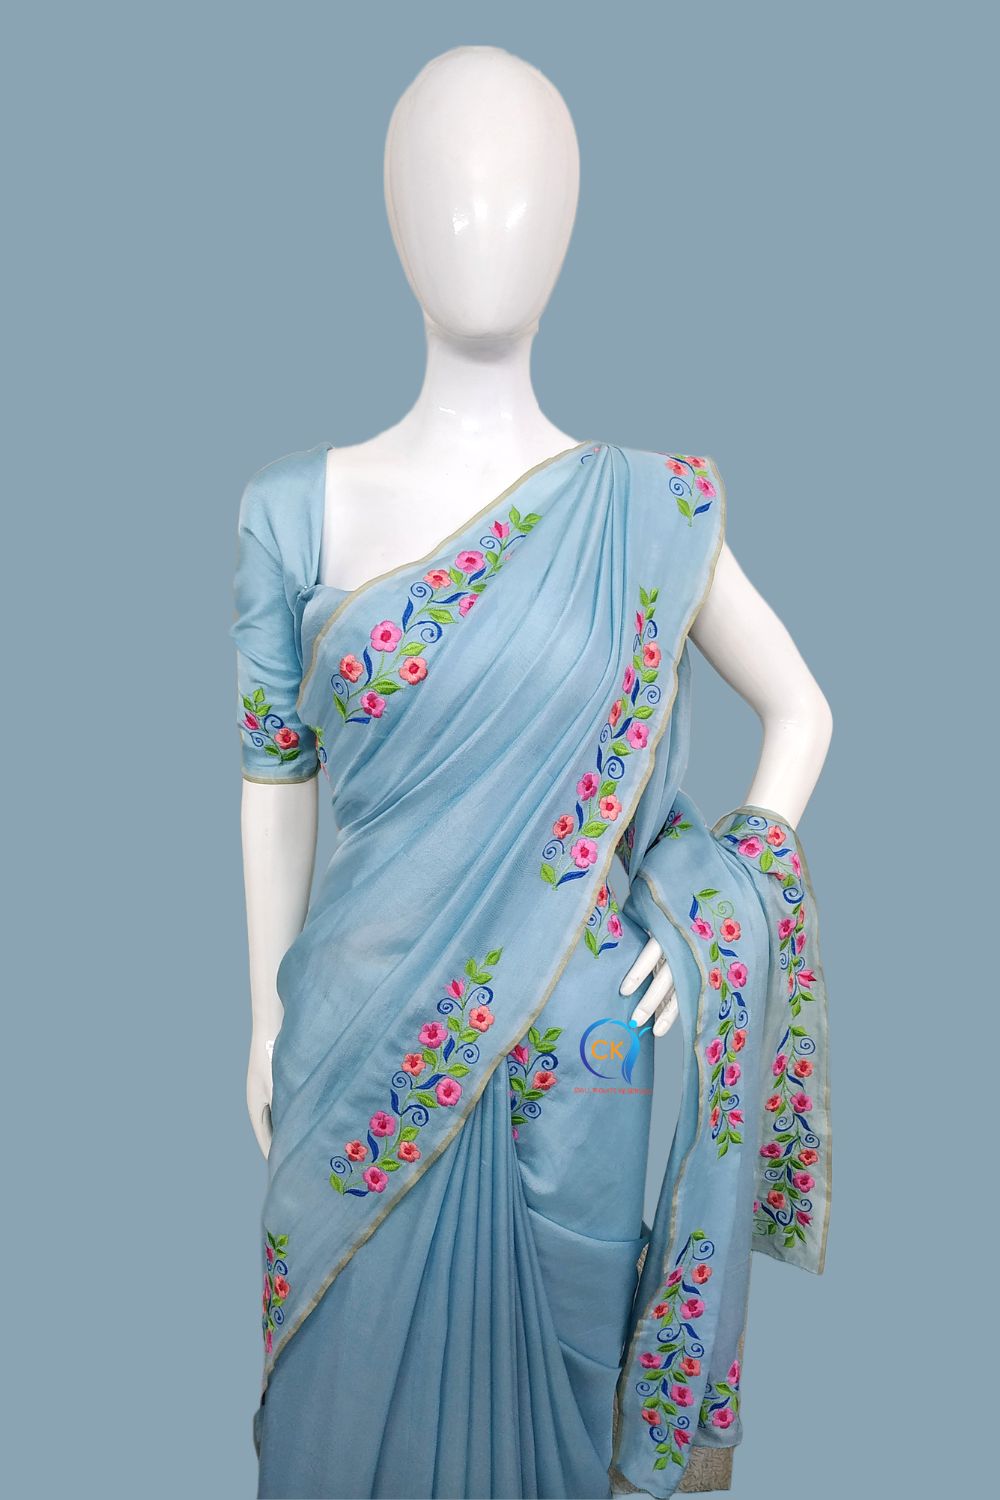 NEW COLLECTIONS OF KERALA SAREES 🪷 - YouTube